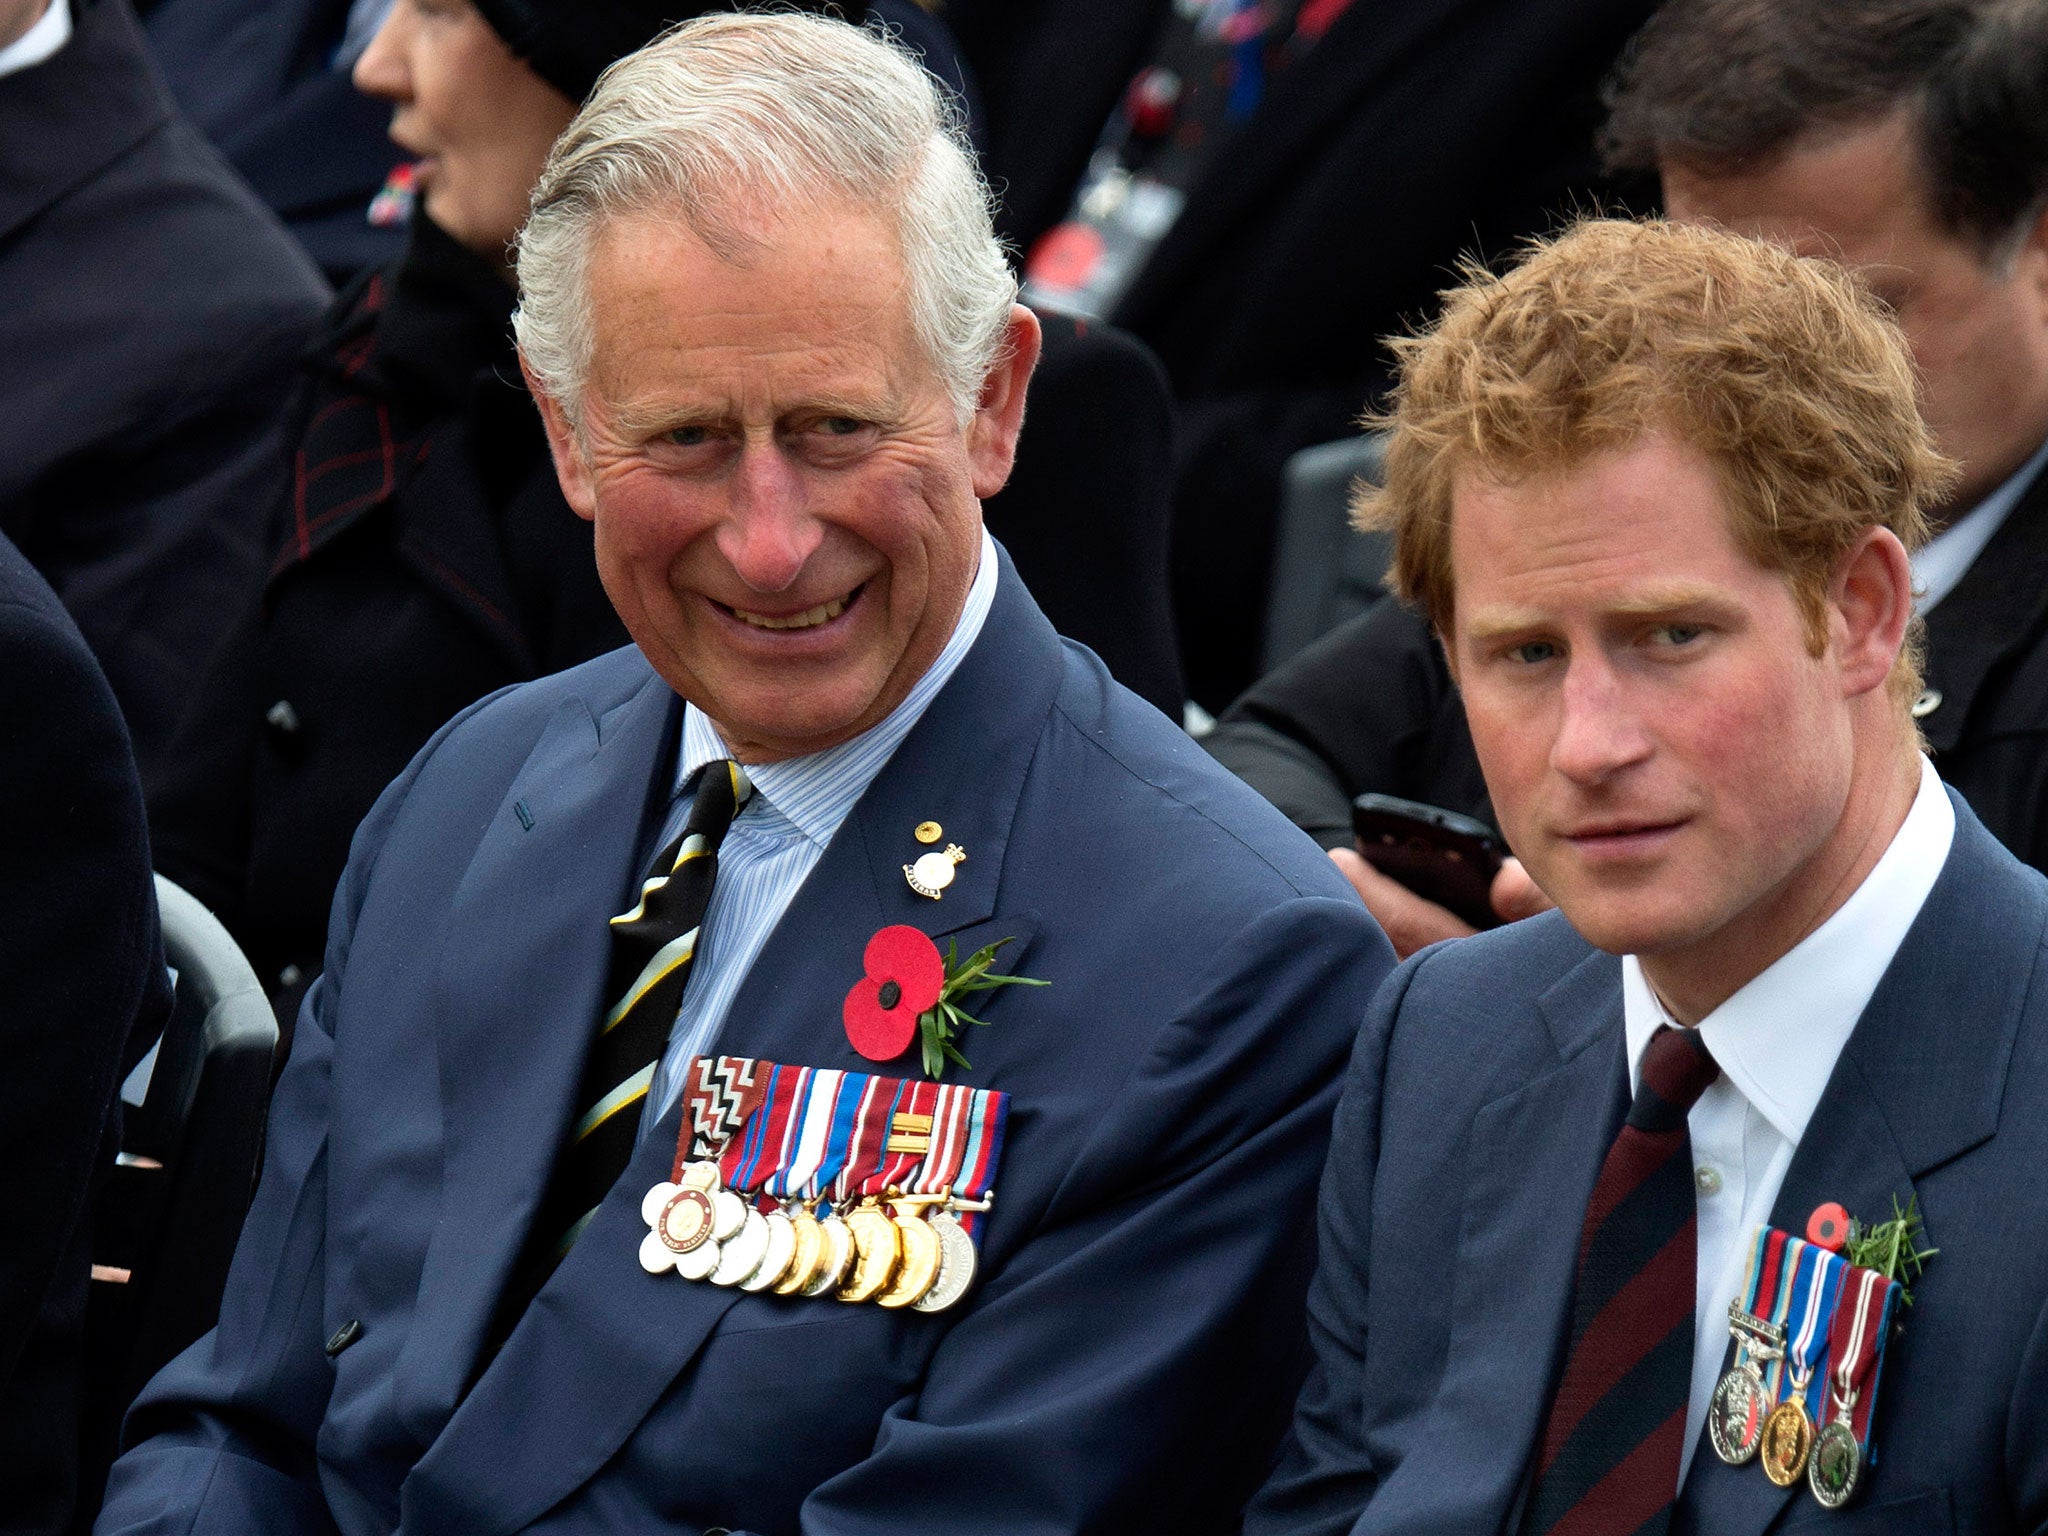 Mark Colborne fantasised about killing Prince Charles so Prince Harry could become king